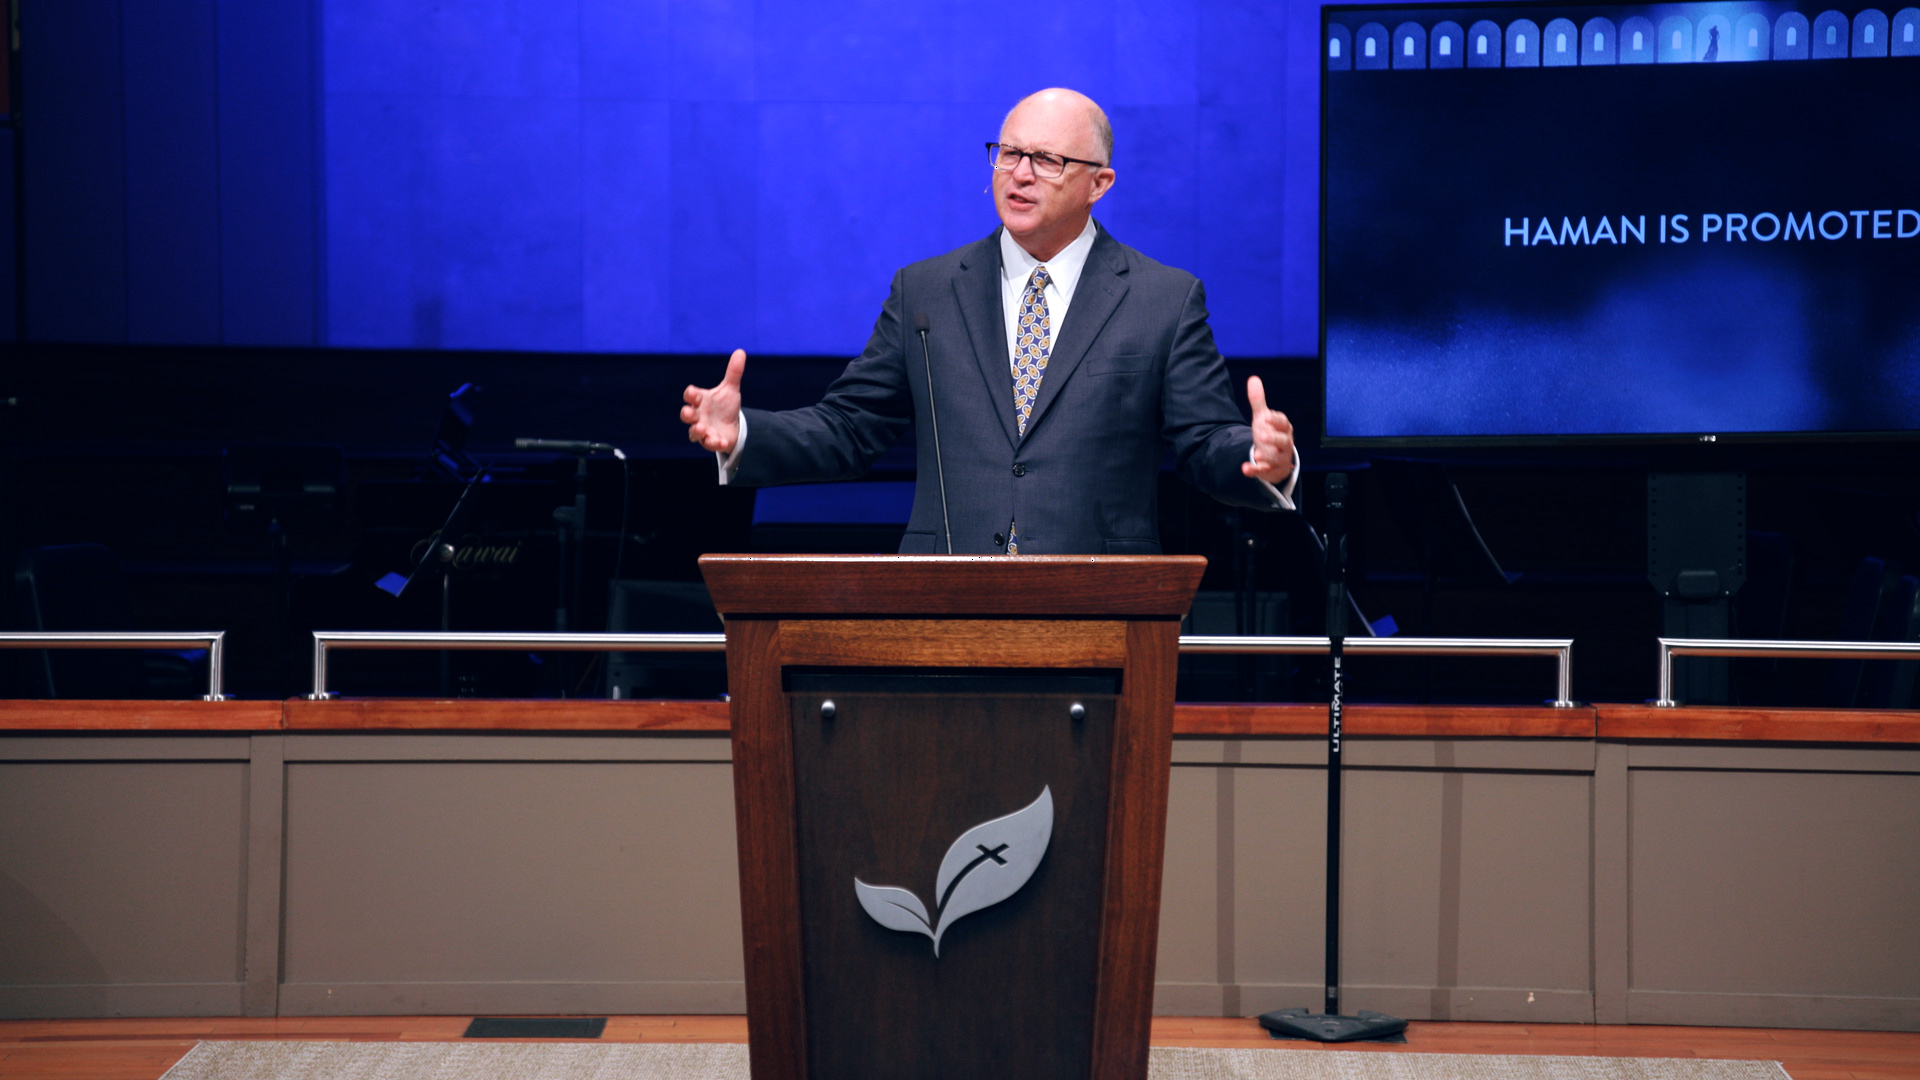 Pastor Paul Chappell: Power and Providence